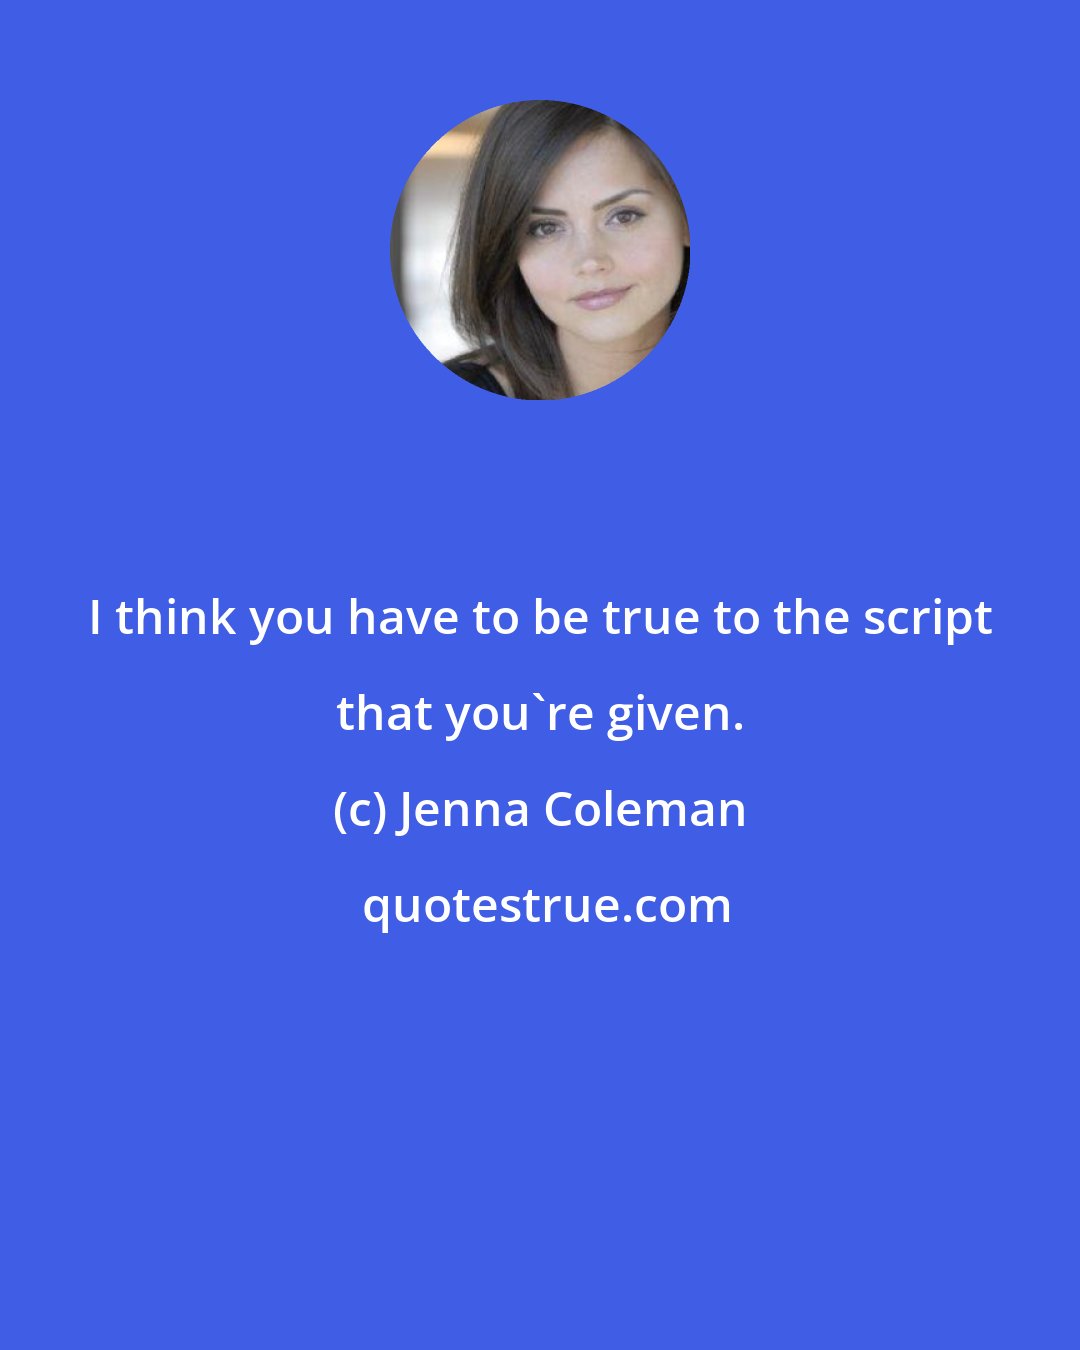 Jenna Coleman: I think you have to be true to the script that you're given.